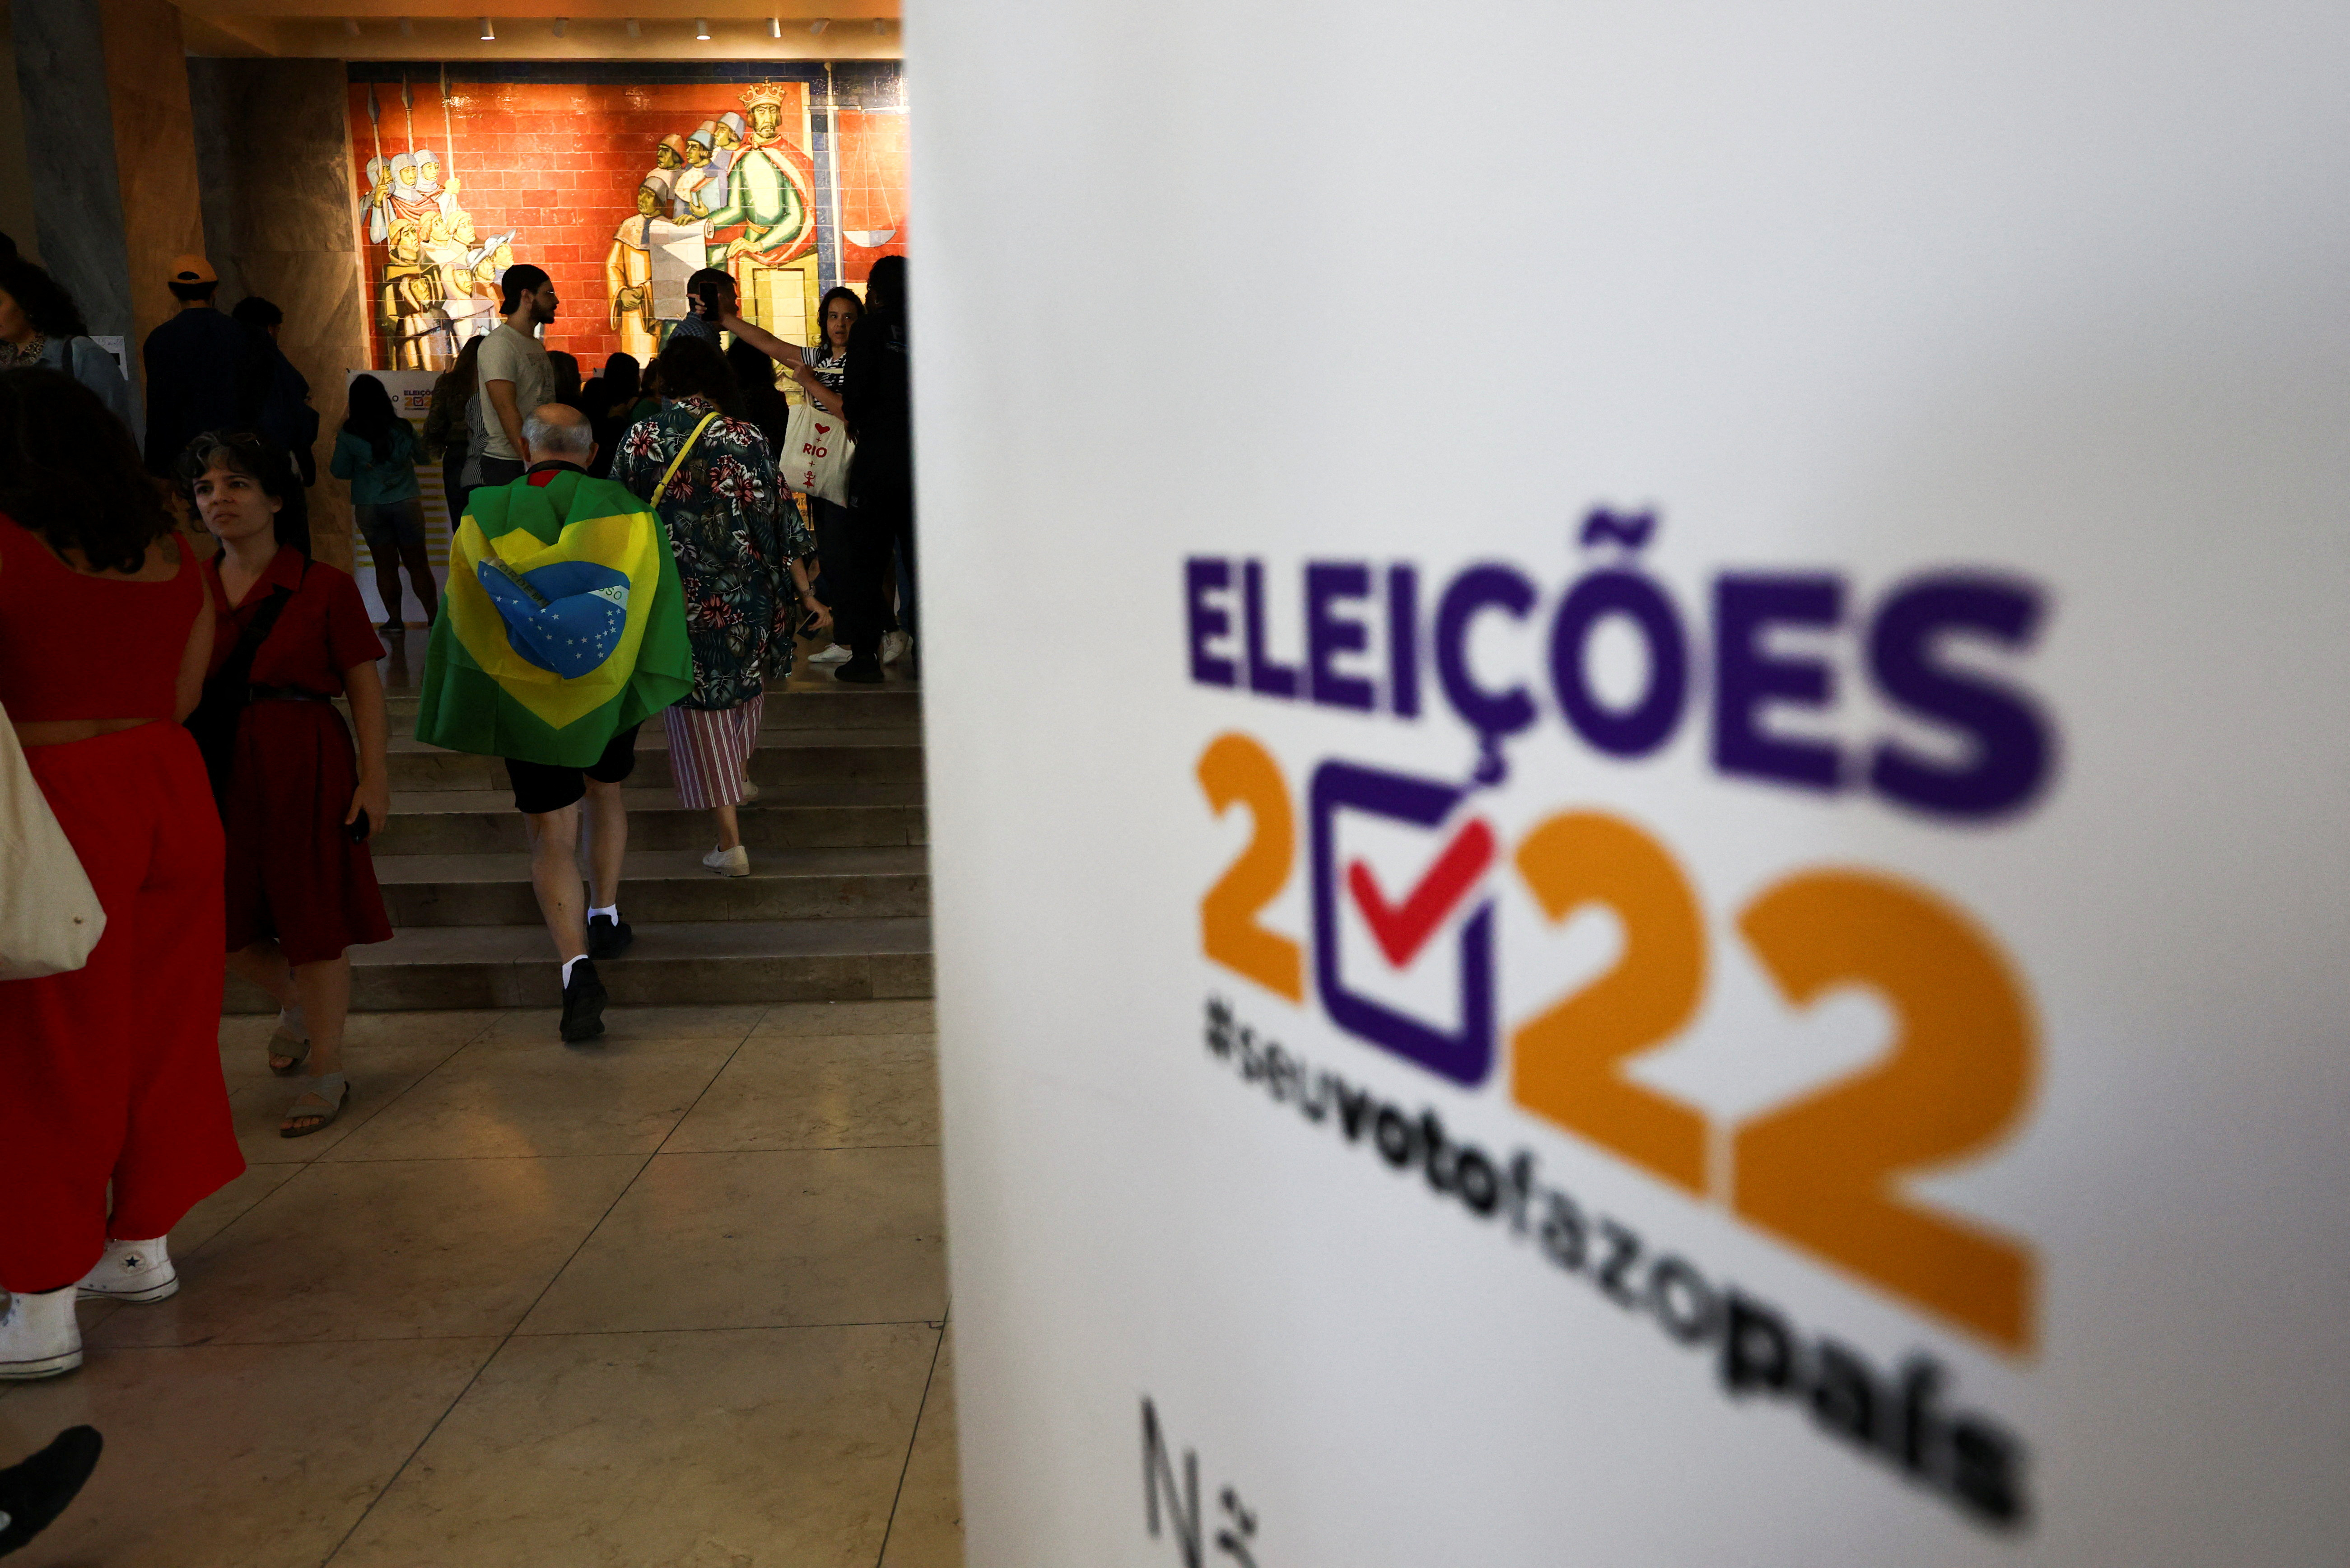 Citizens of Brazil wait in line to cast their votes in their country's elections in Lisbon, Portugal October 2, 2022.  REUTERS/Pedro Nunes